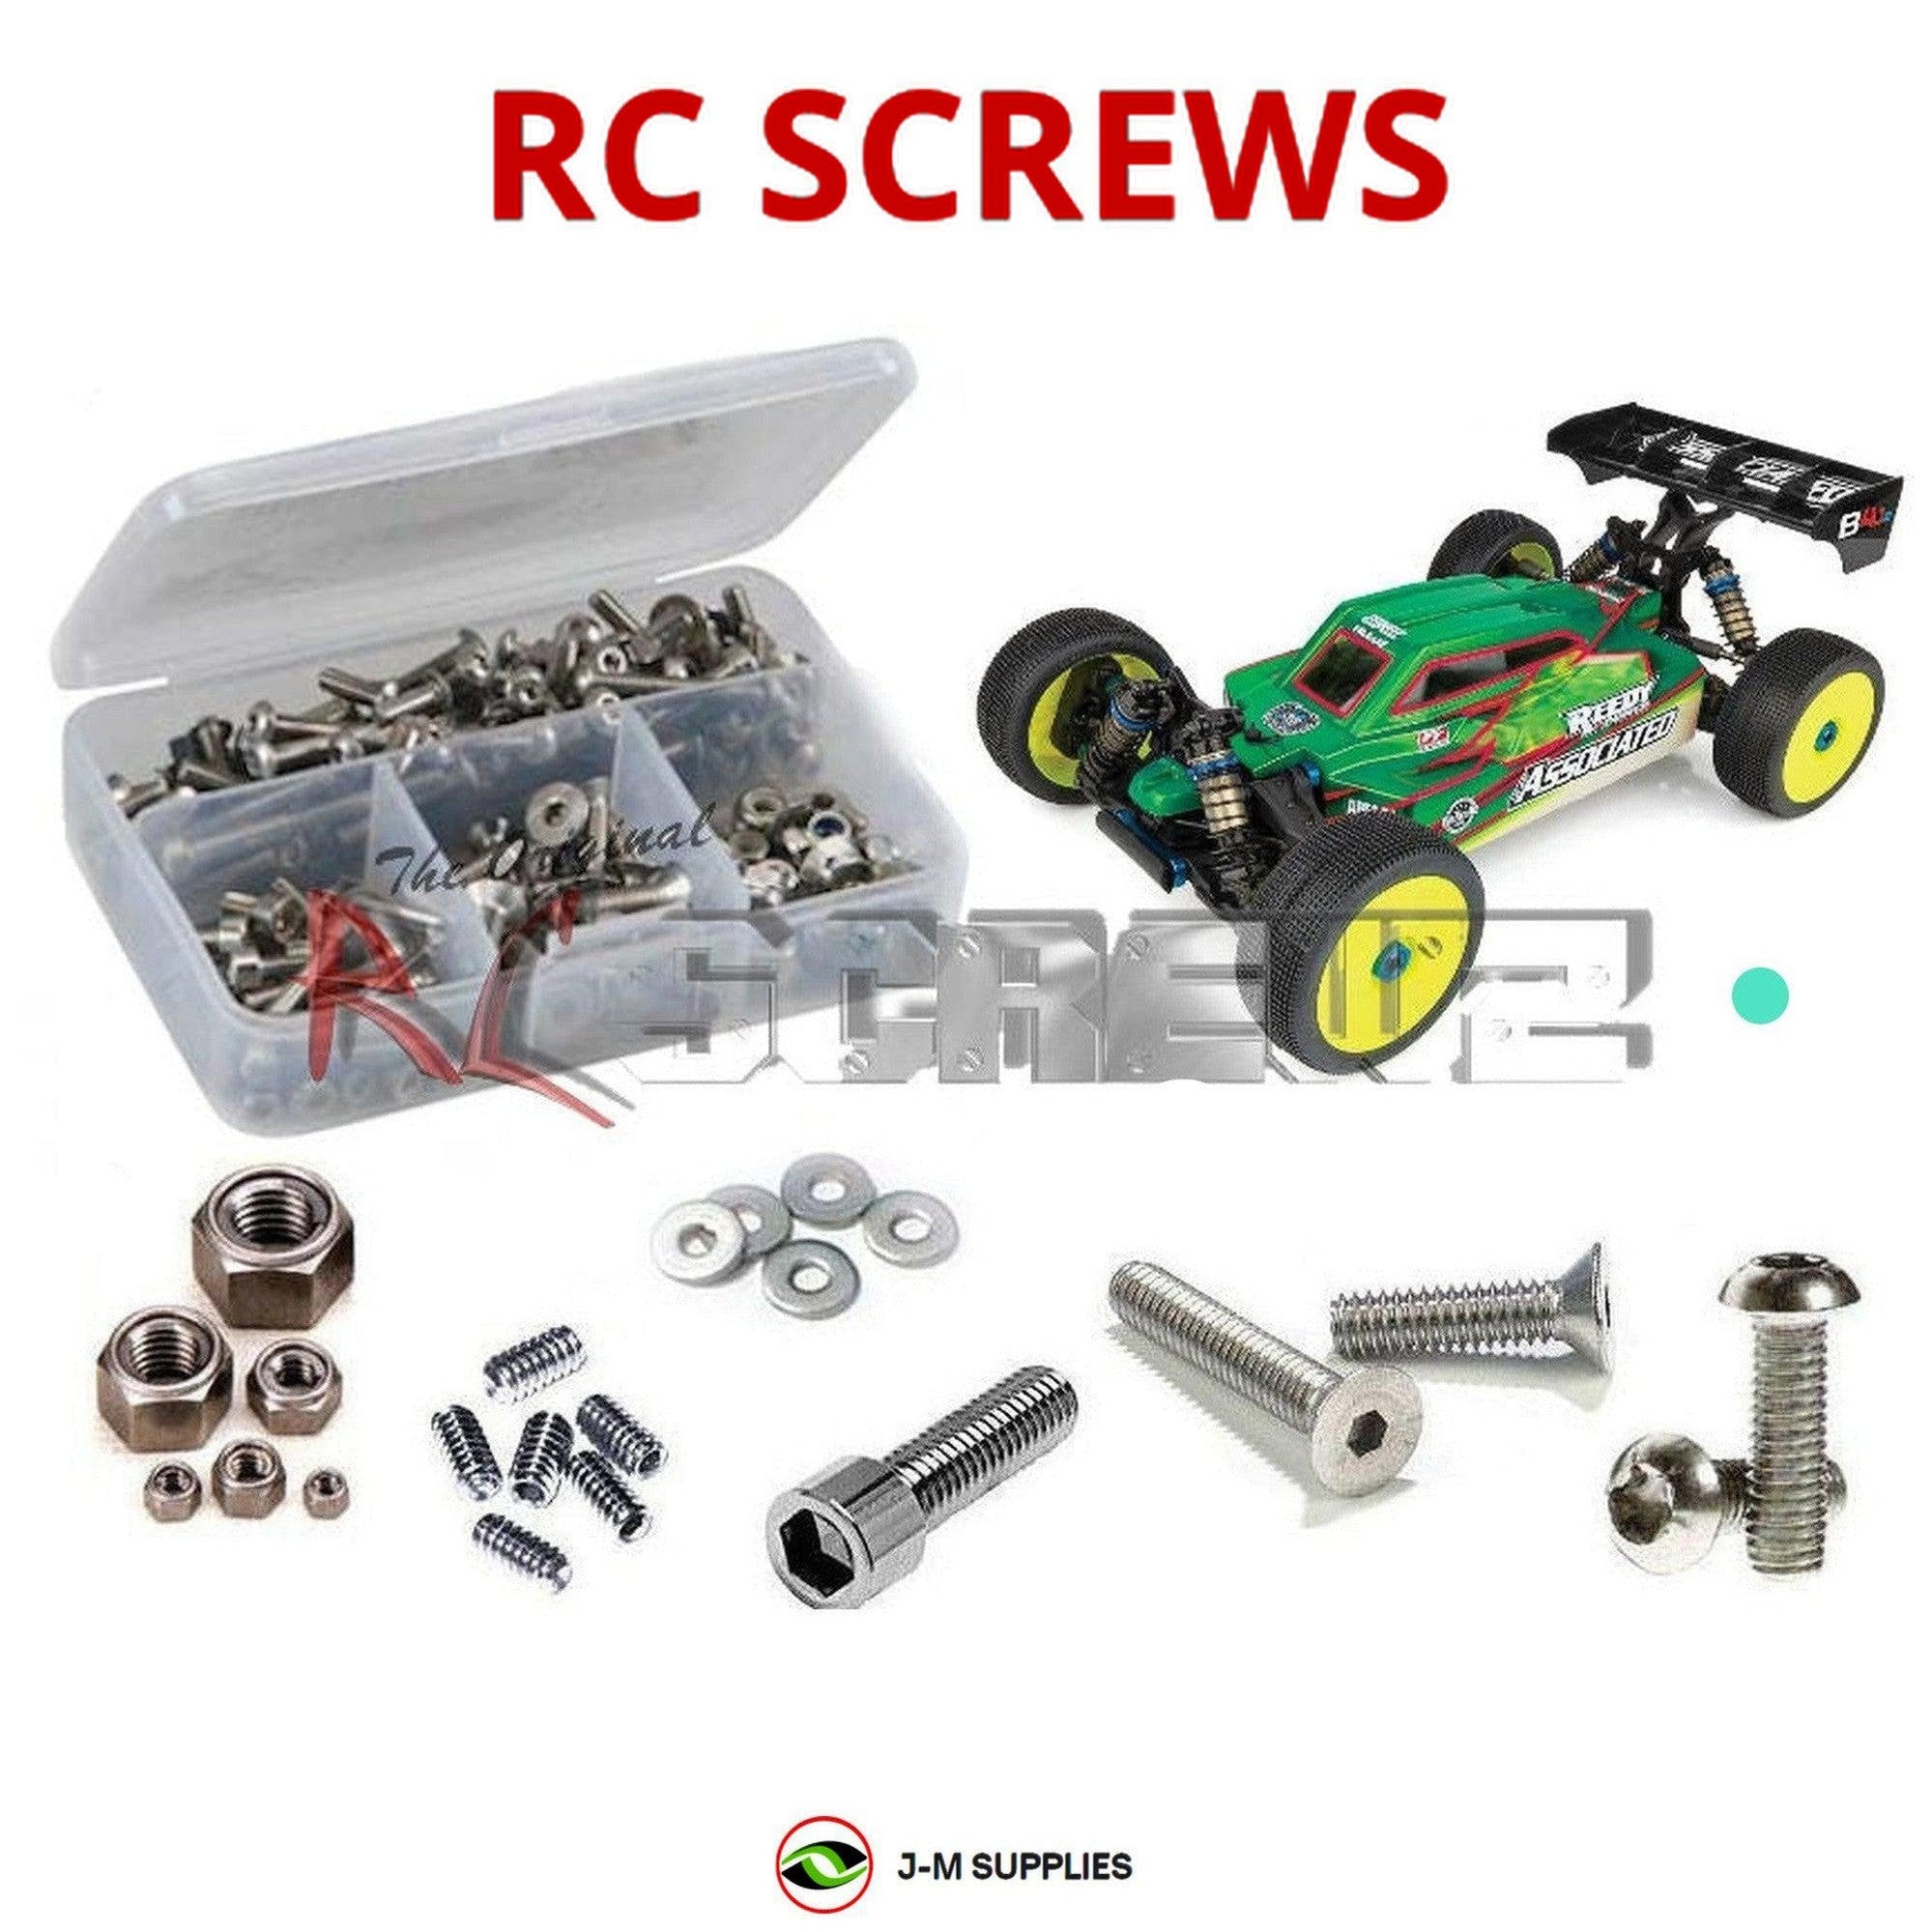 RCScrewZ Stainless Screw Kit asc139 for Associated RC8B4.1e / Team 1/8 80950 RC - Picture 1 of 12